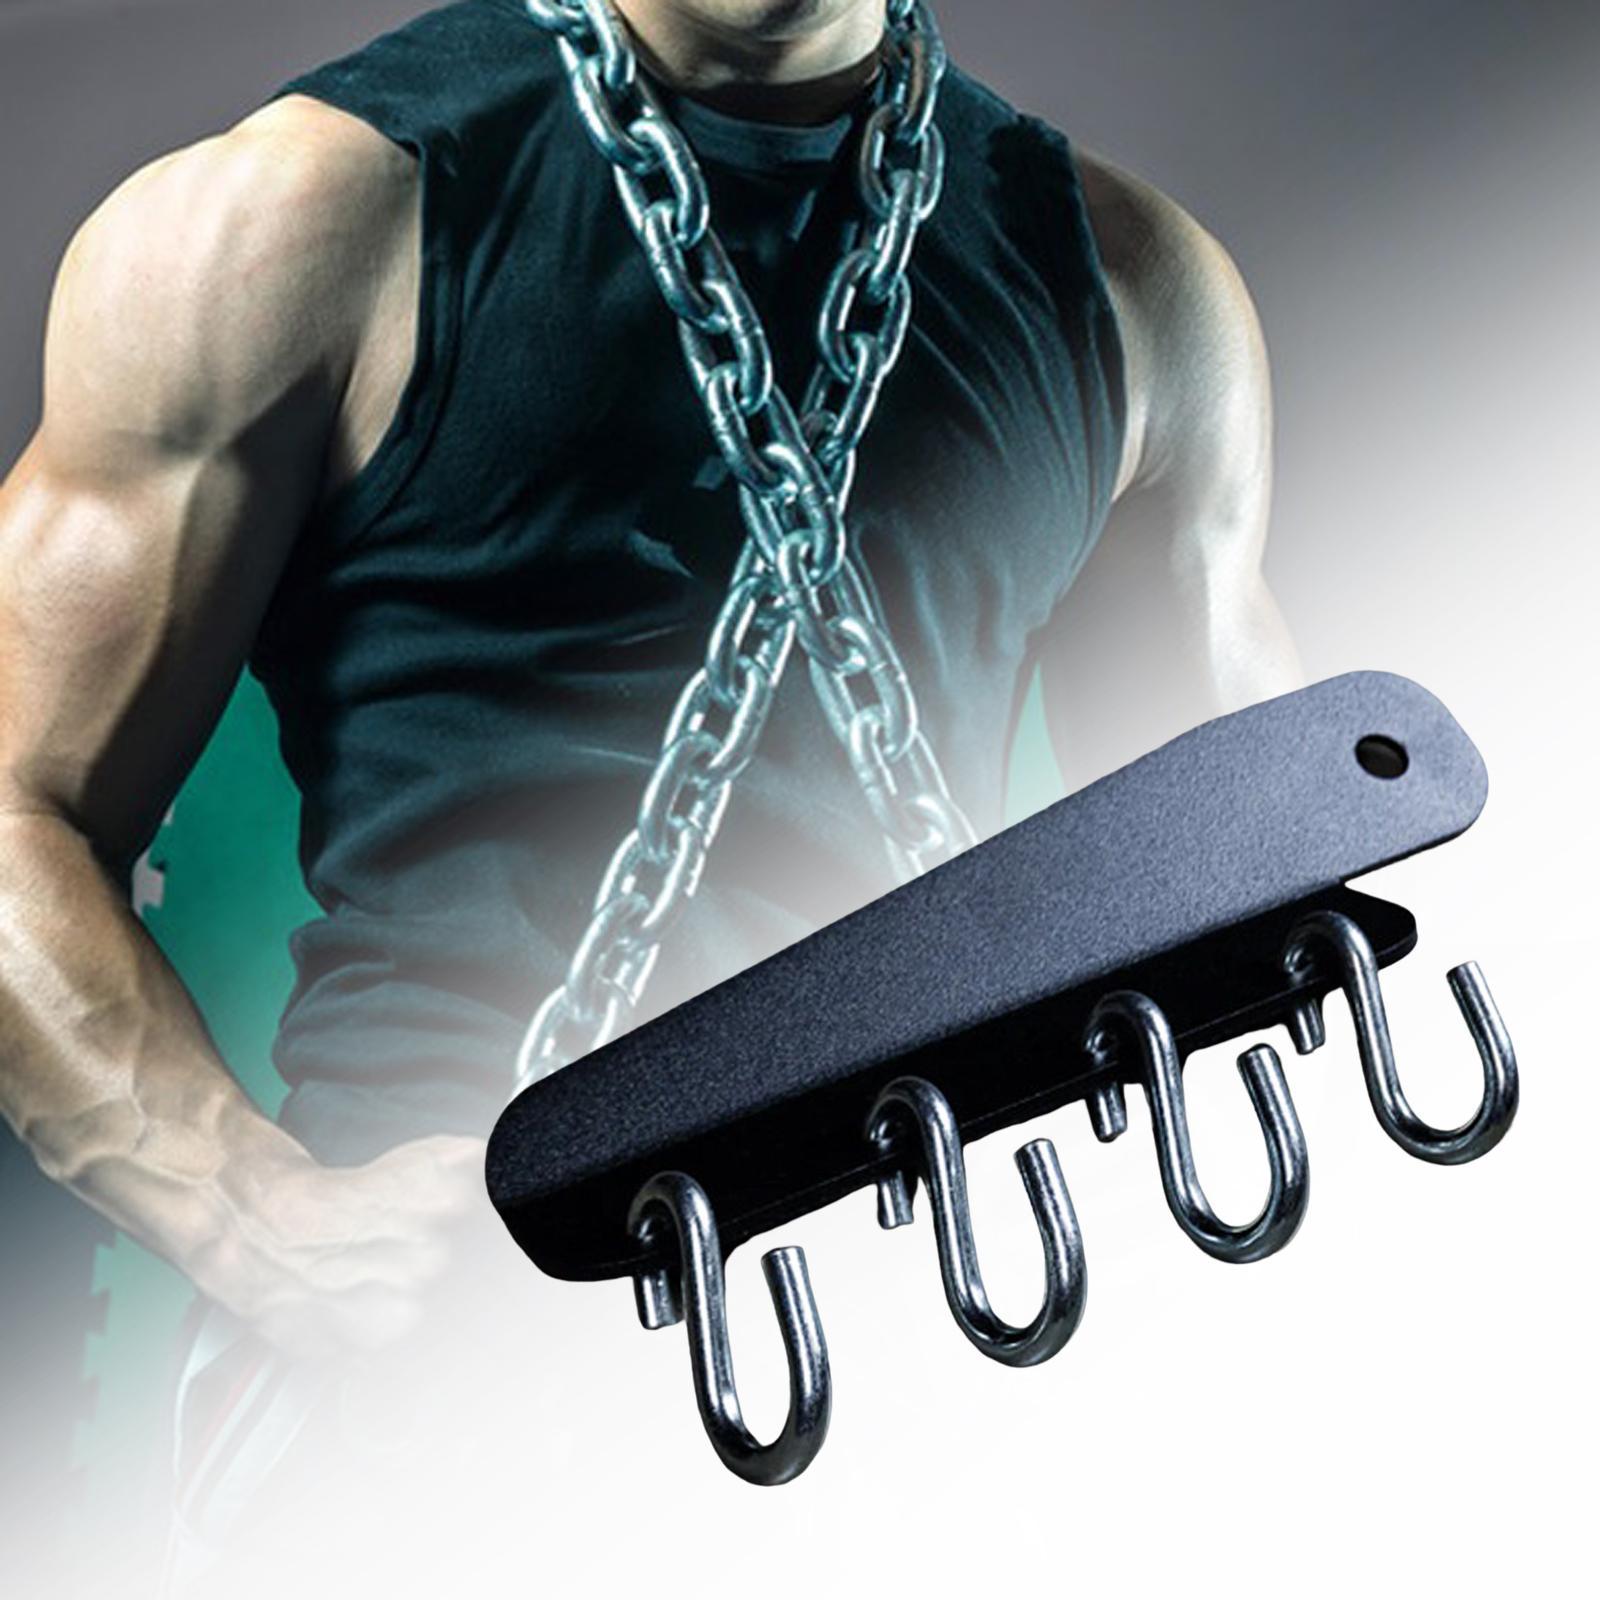 Gym Chains Rack Storage Holder Hanging Wall Mount for Fitness Exercise Bands